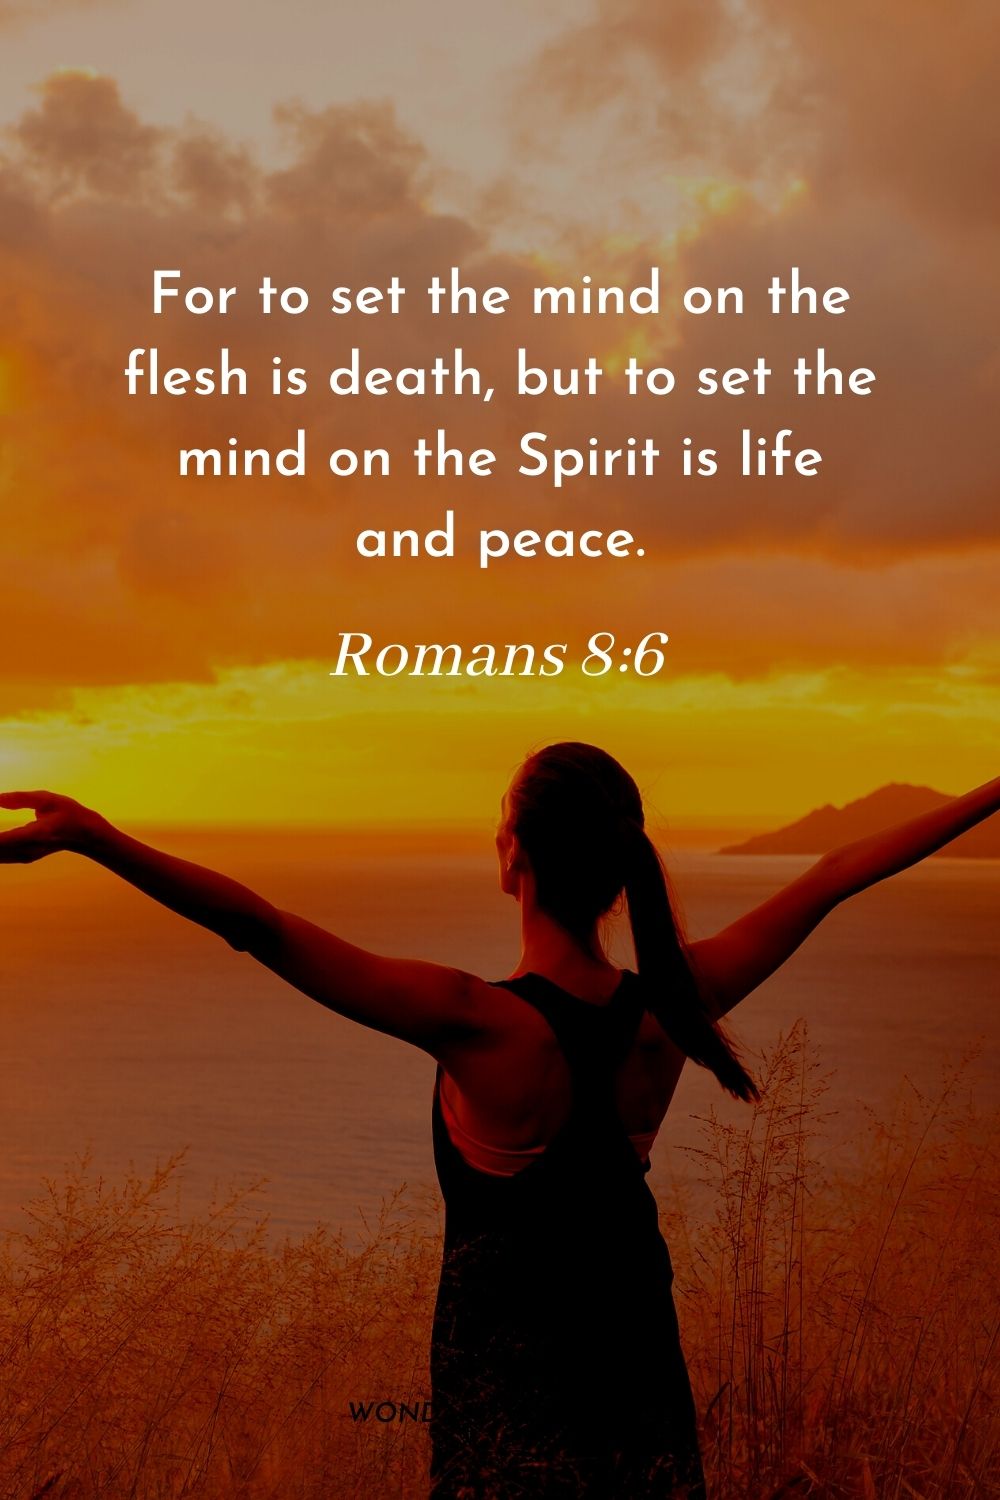 For to set the mind on the flesh is death, but to set the mind on the Spirit is life and peace. Romans 8:6